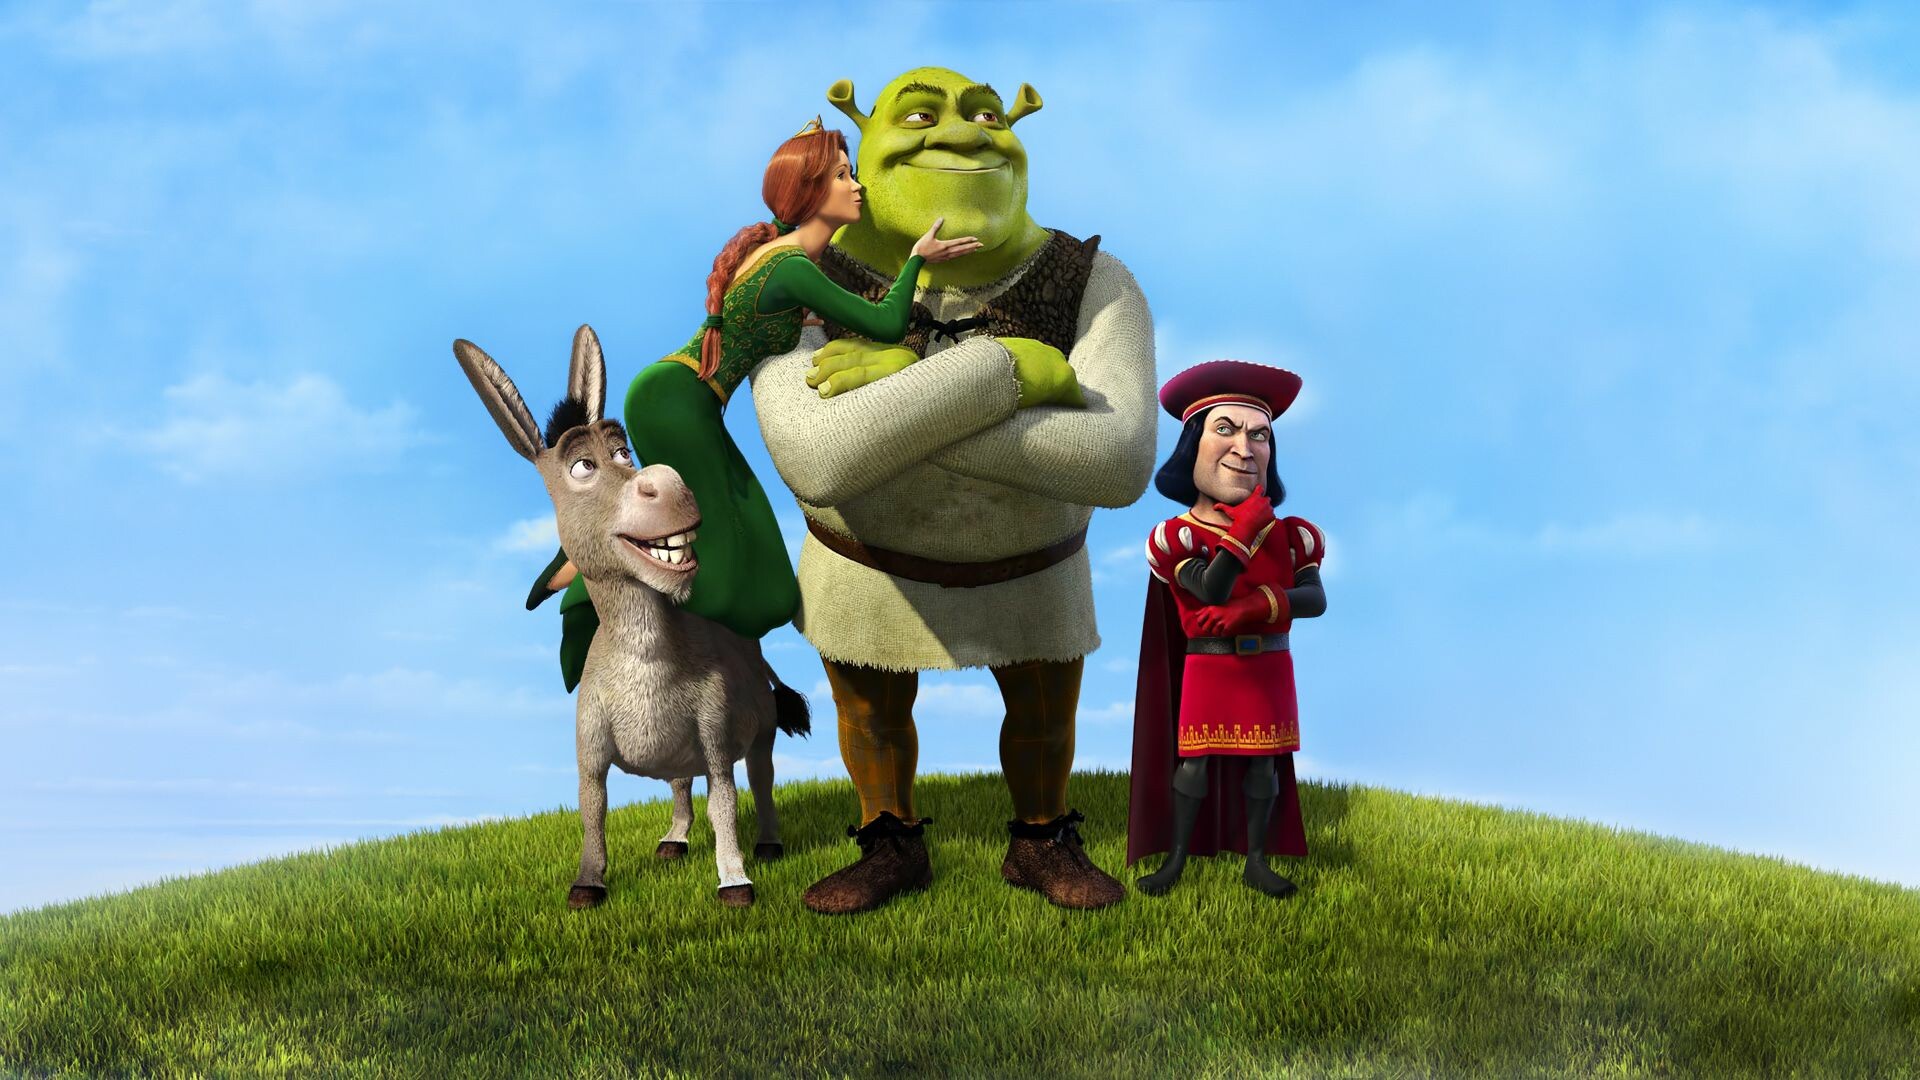 Shrek: In the film, the ogre, voiced by Myers, finds his swamp home overrun by fairy-tale creatures banished by Lord Farquaad. 1920x1080 Full HD Wallpaper.